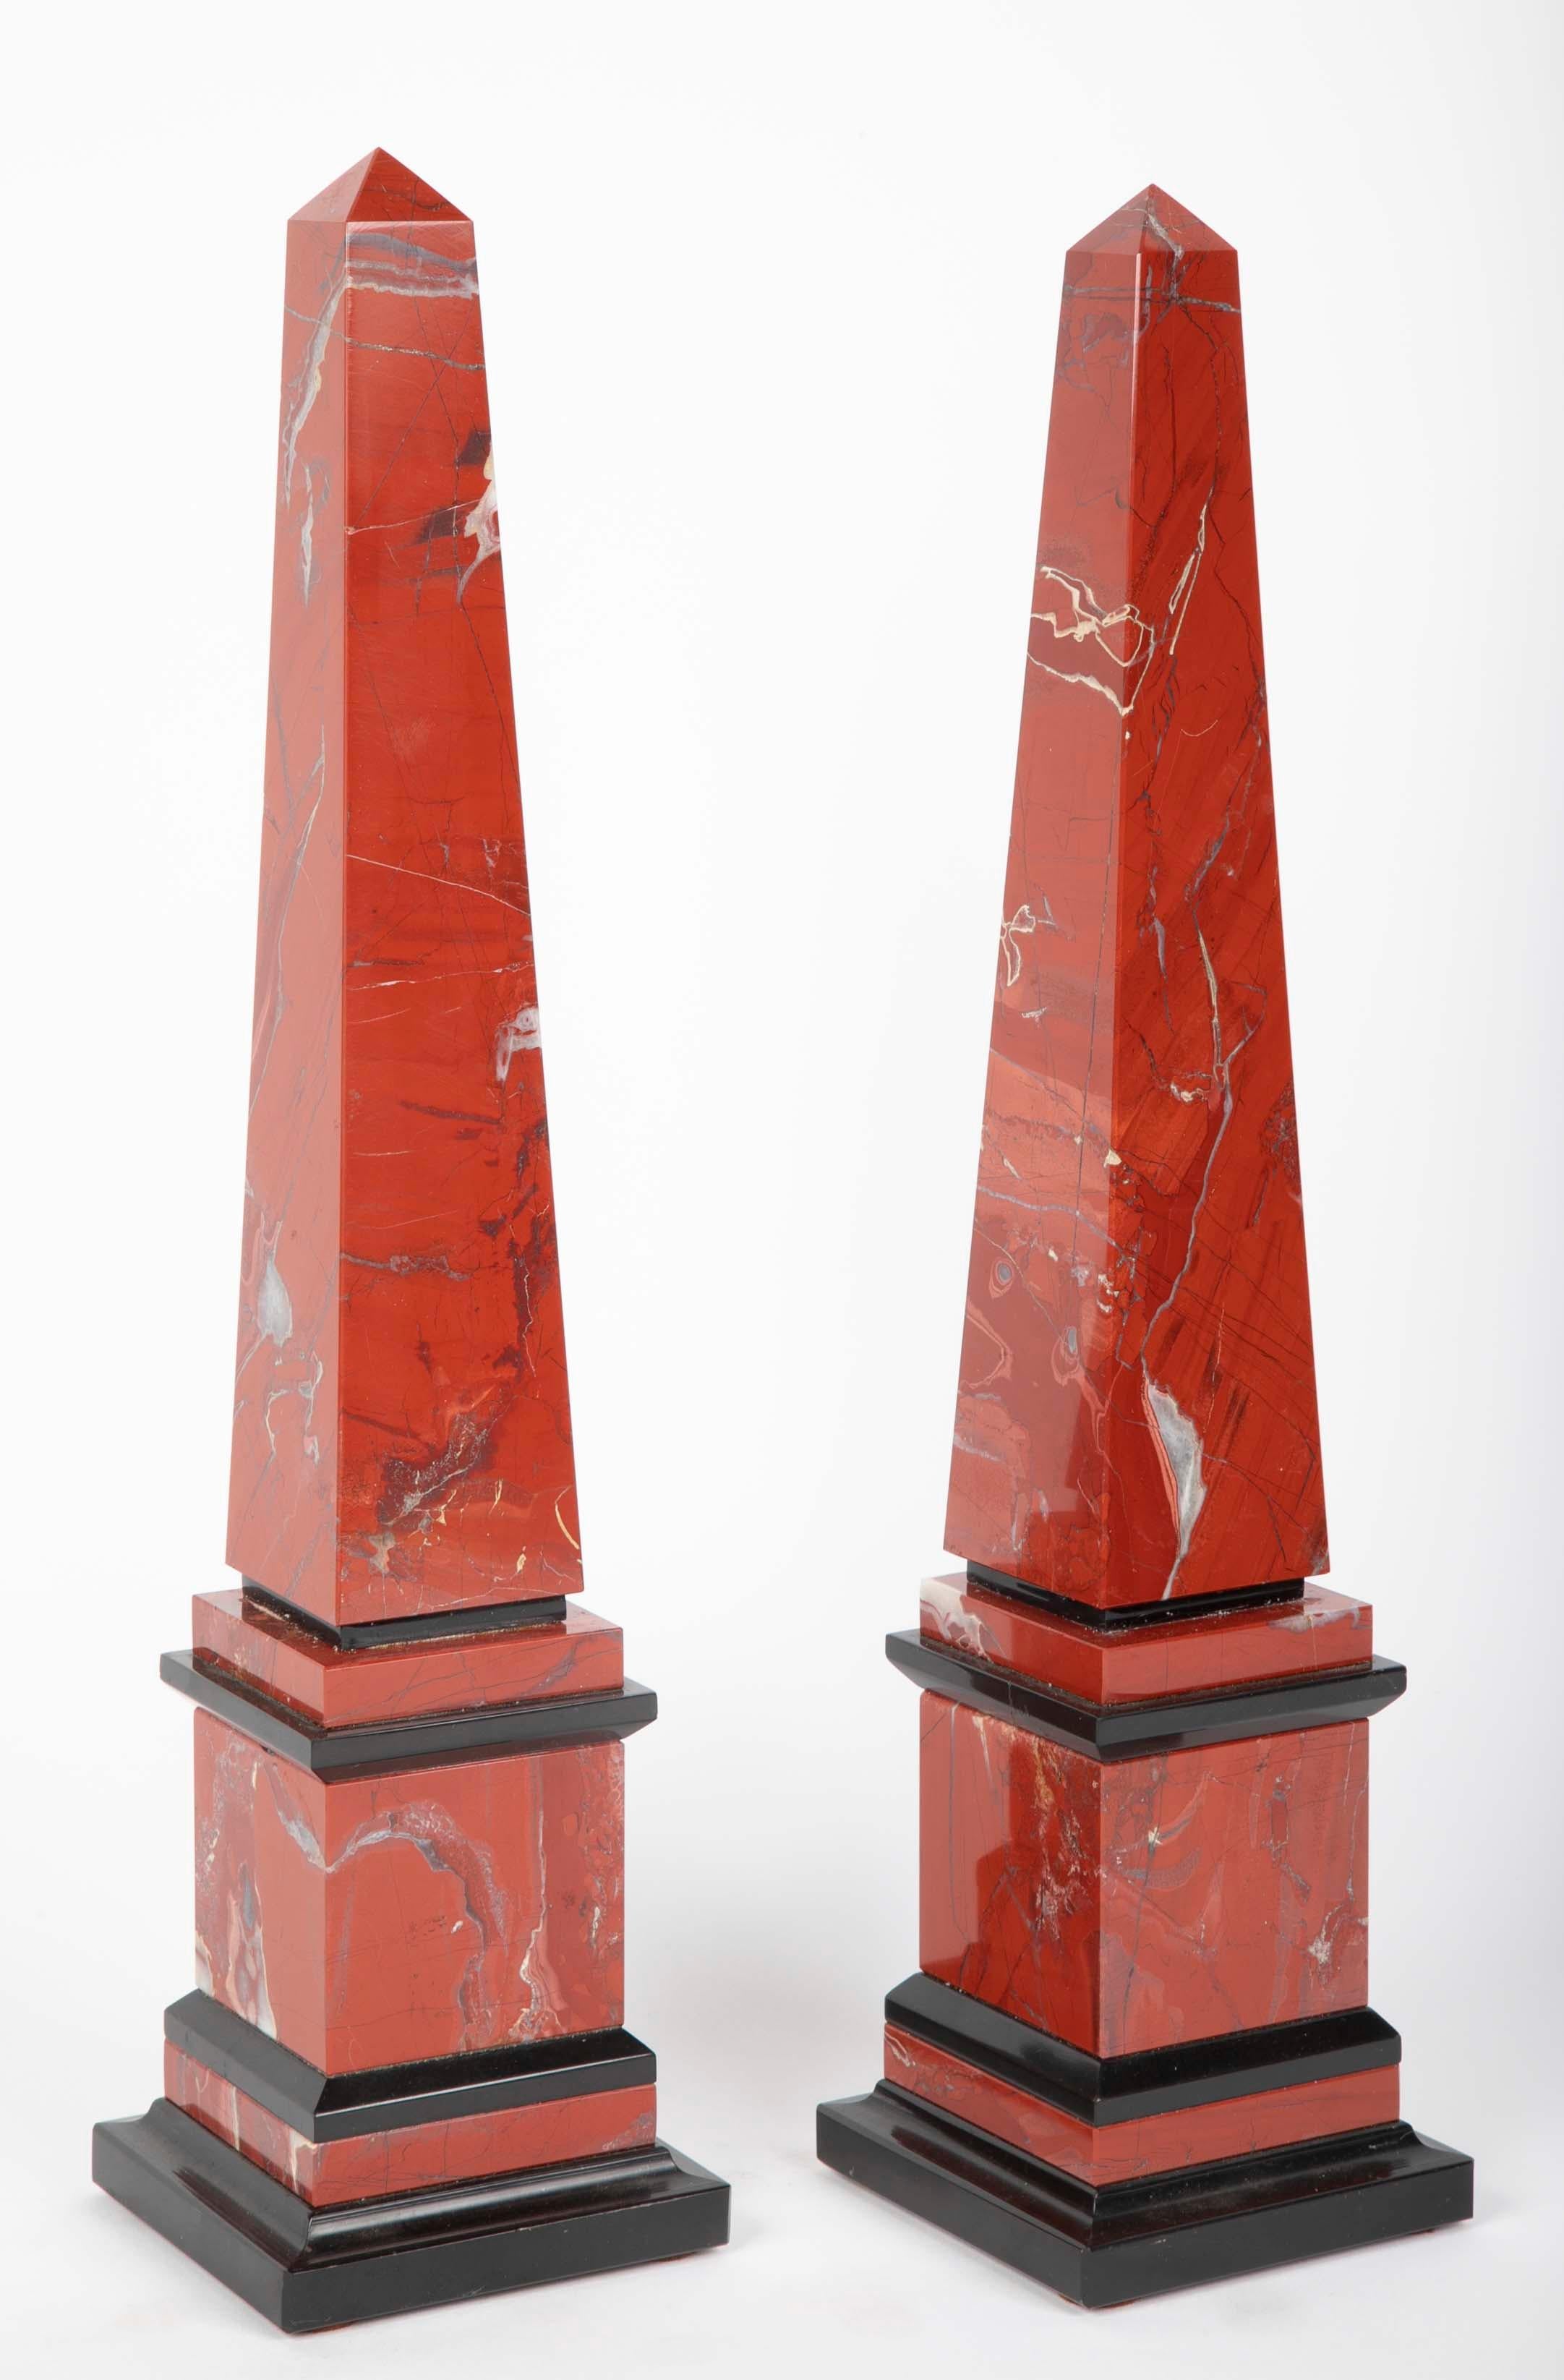 Pair of red marble obelisks from the 1920s.